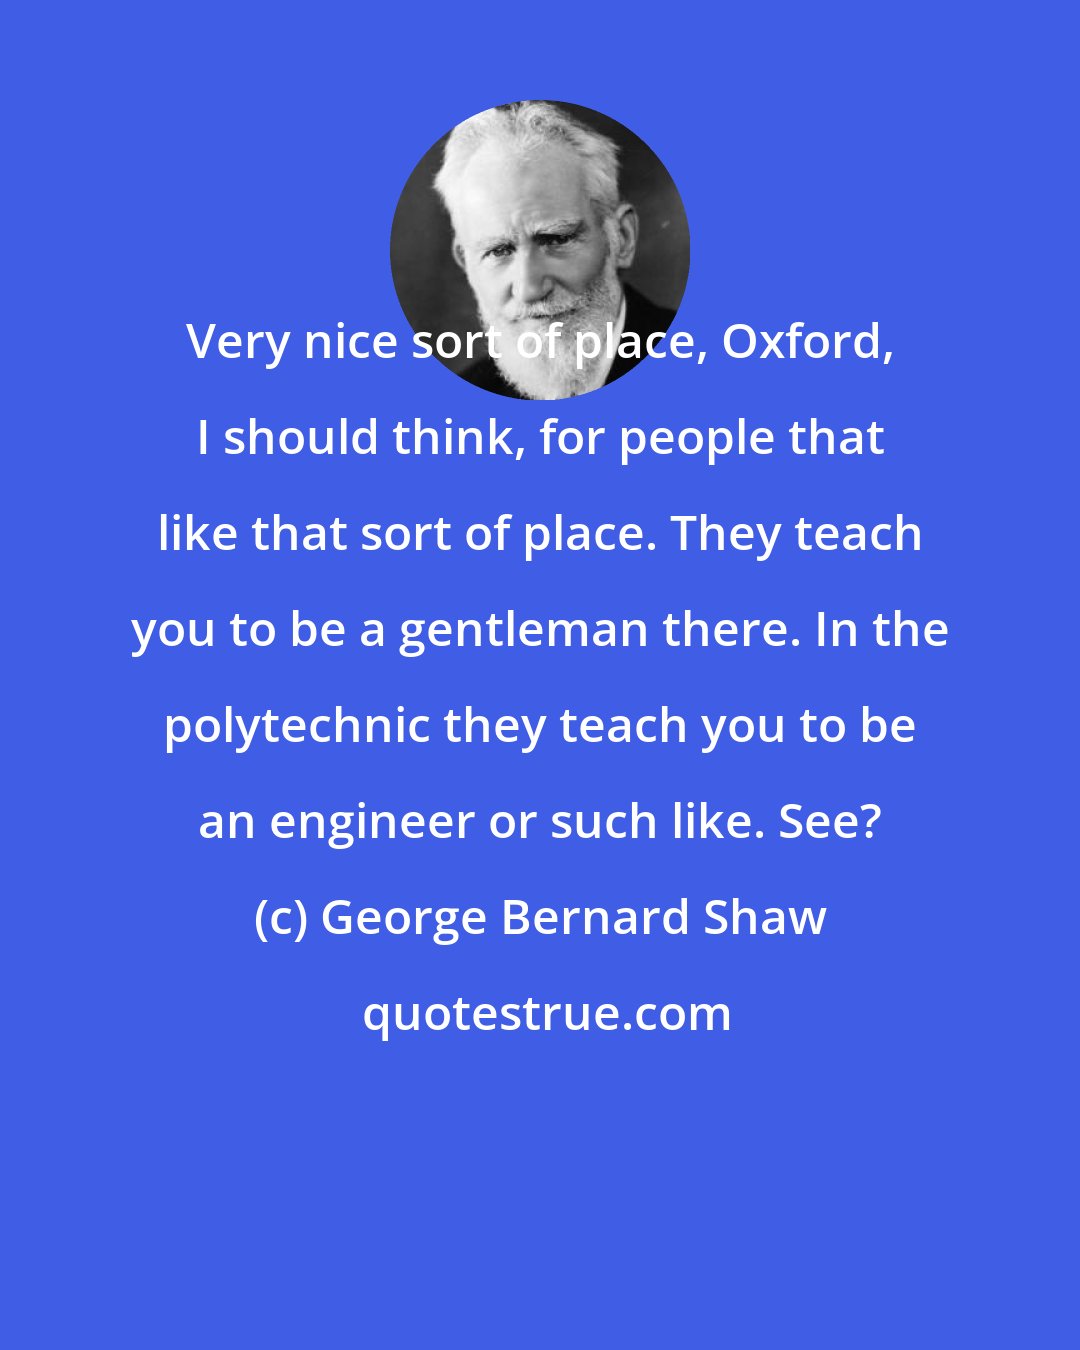 George Bernard Shaw: Very nice sort of place, Oxford, I should think, for people that like that sort of place. They teach you to be a gentleman there. In the polytechnic they teach you to be an engineer or such like. See?